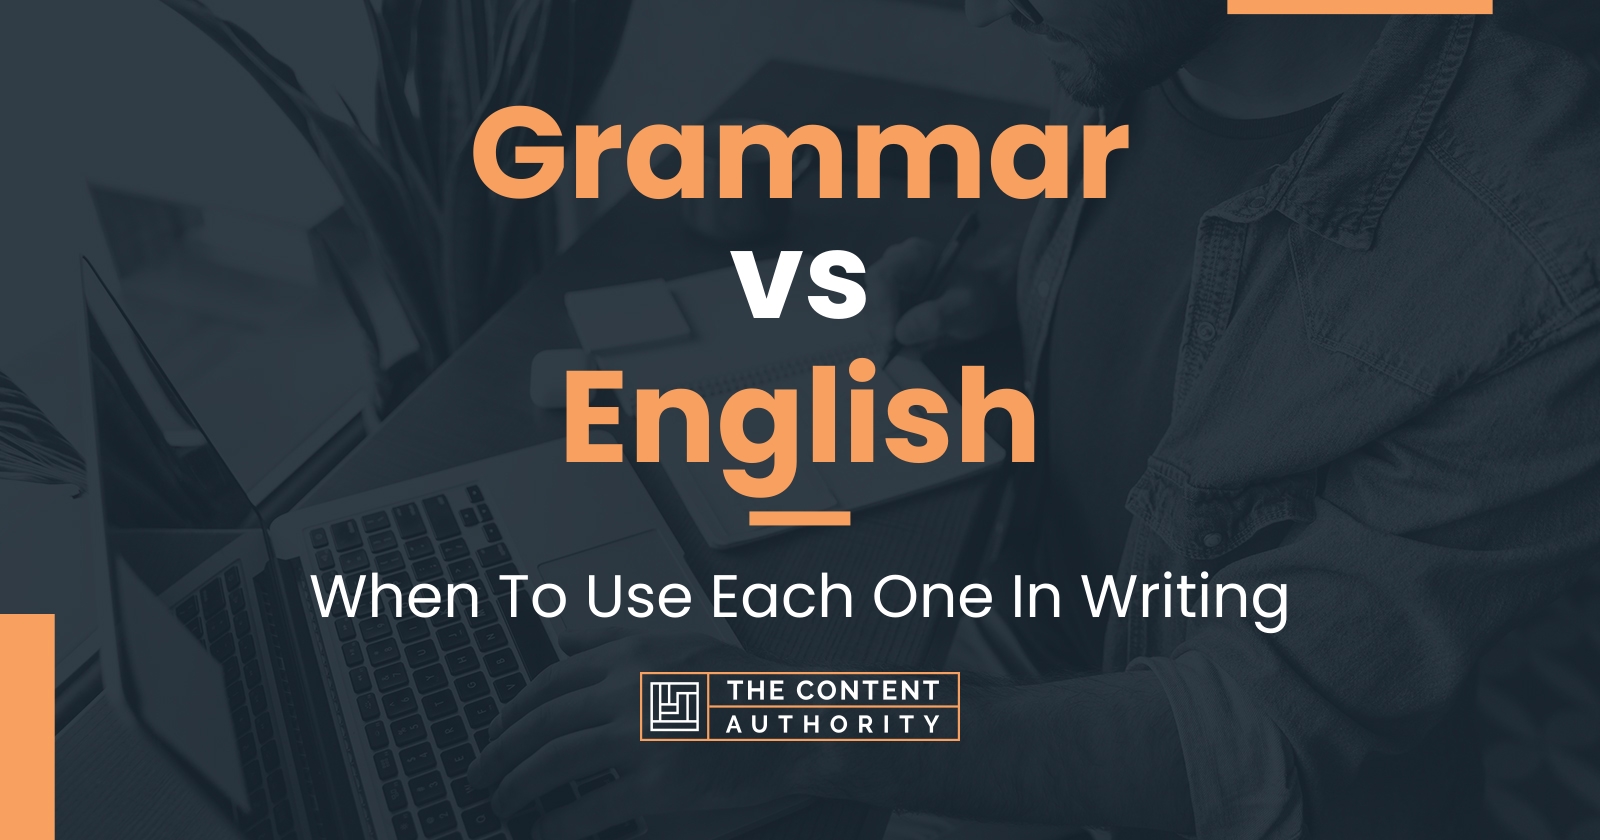 grammar-vs-english-when-to-use-each-one-in-writing